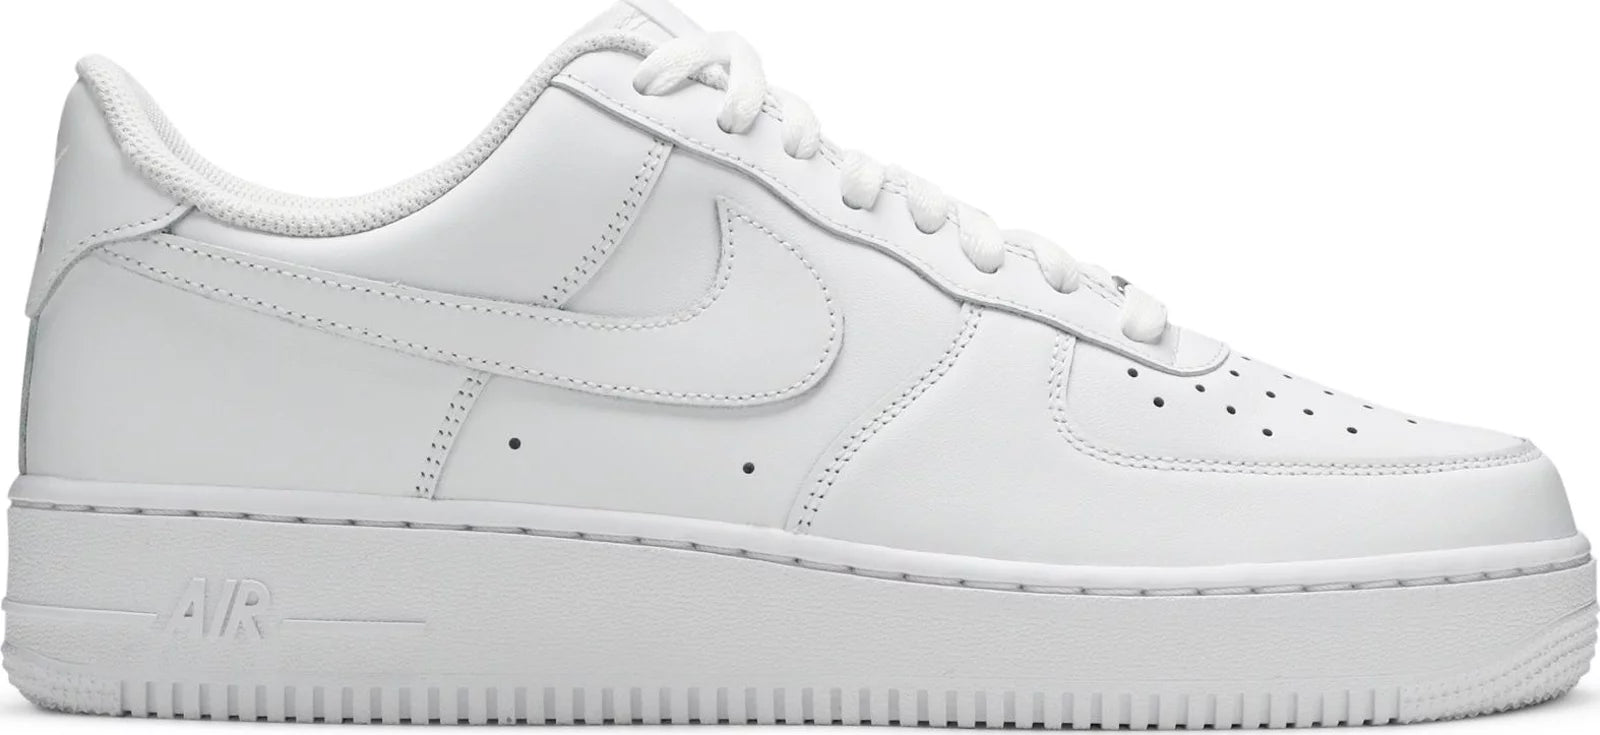 nike air force 1 low white 930606